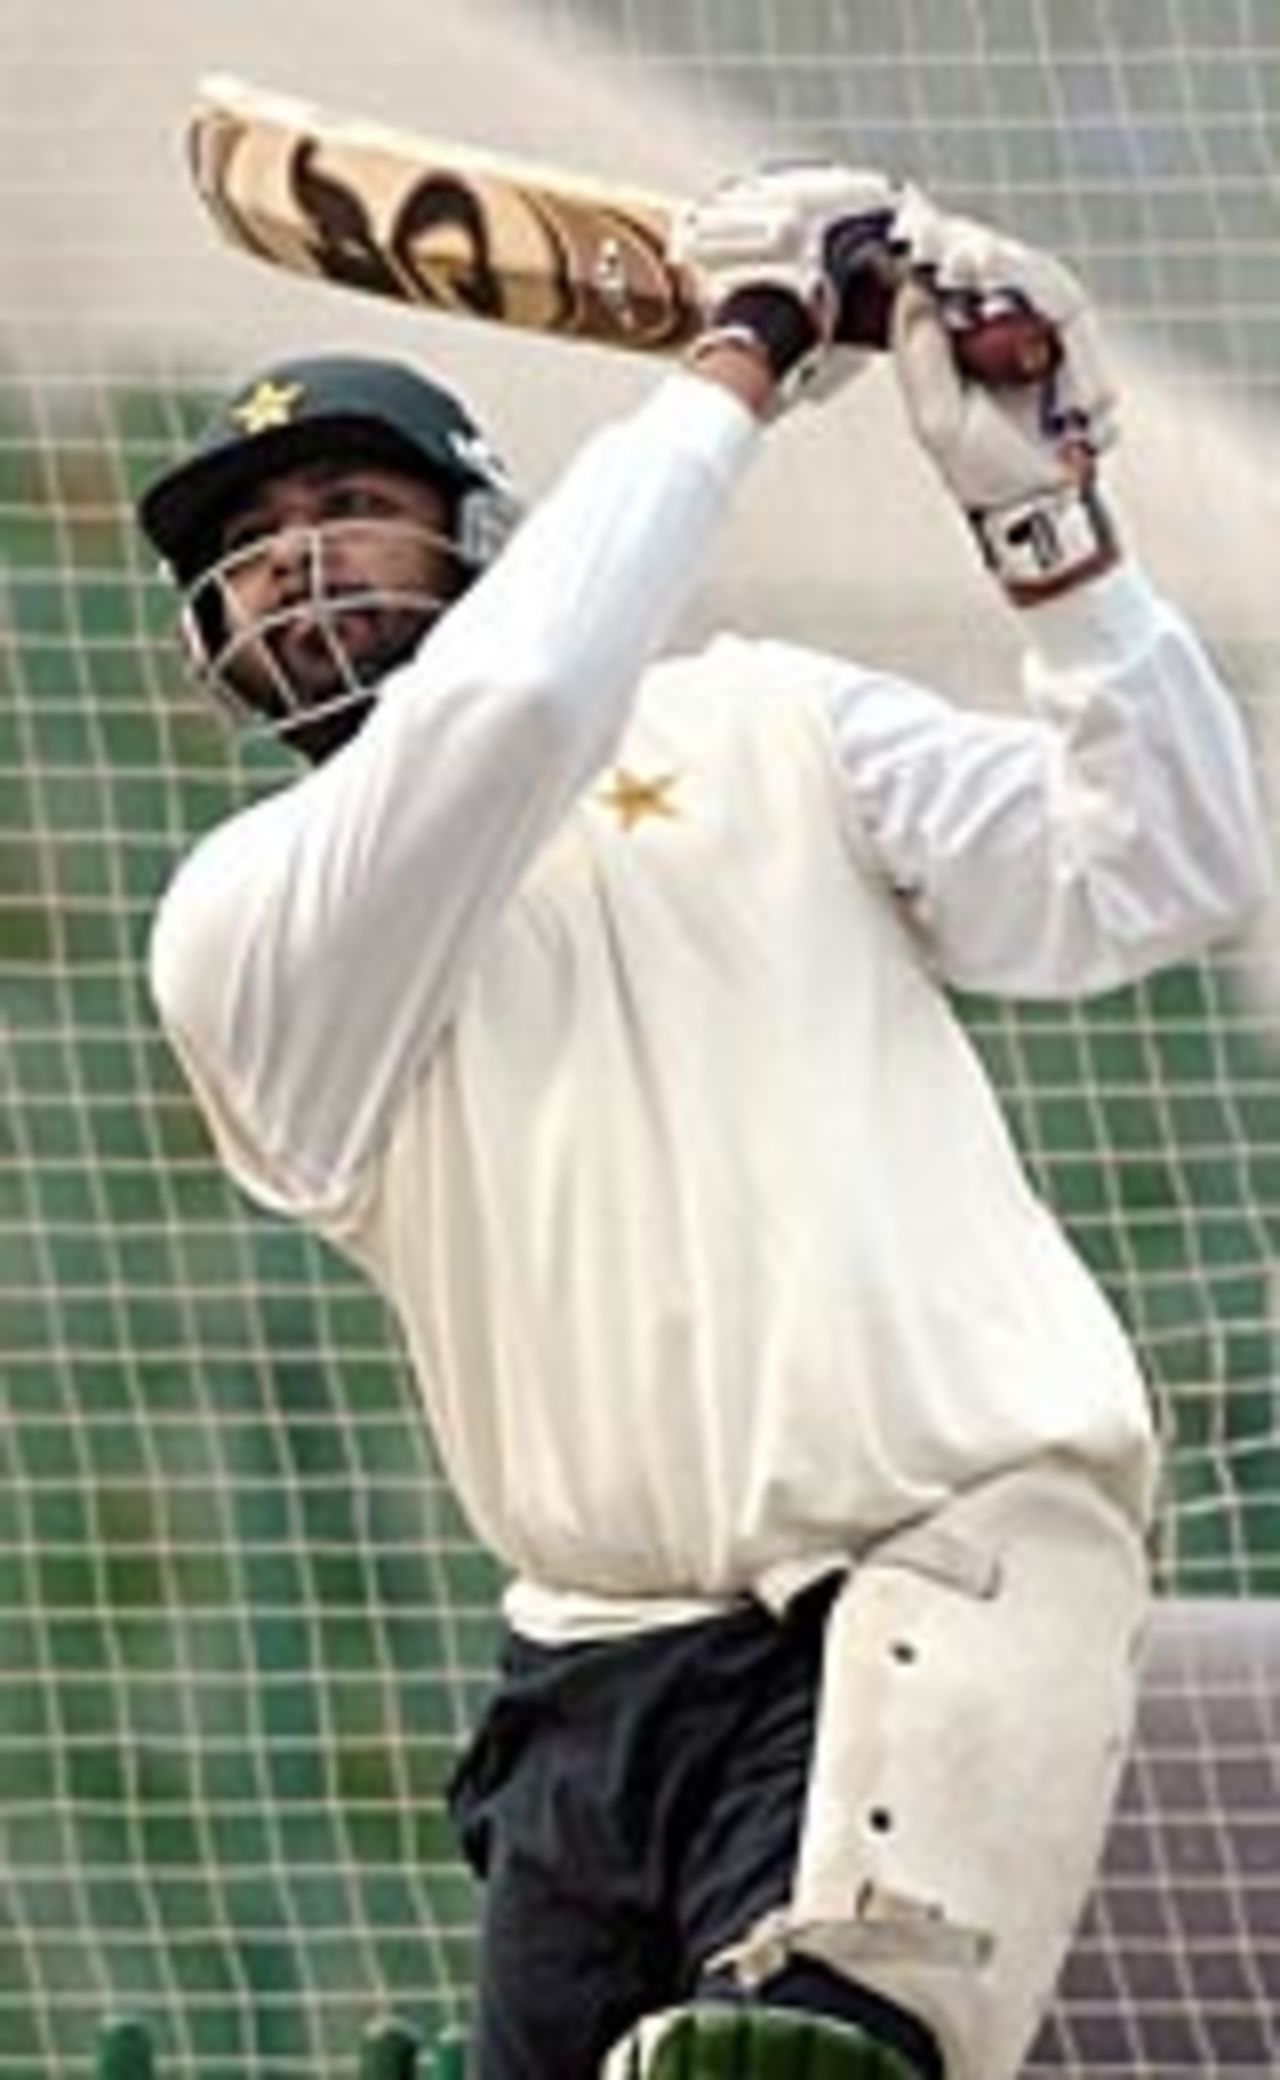 Inzamam-ul-Haq batting in the nets at Lahore, September 28, 2004